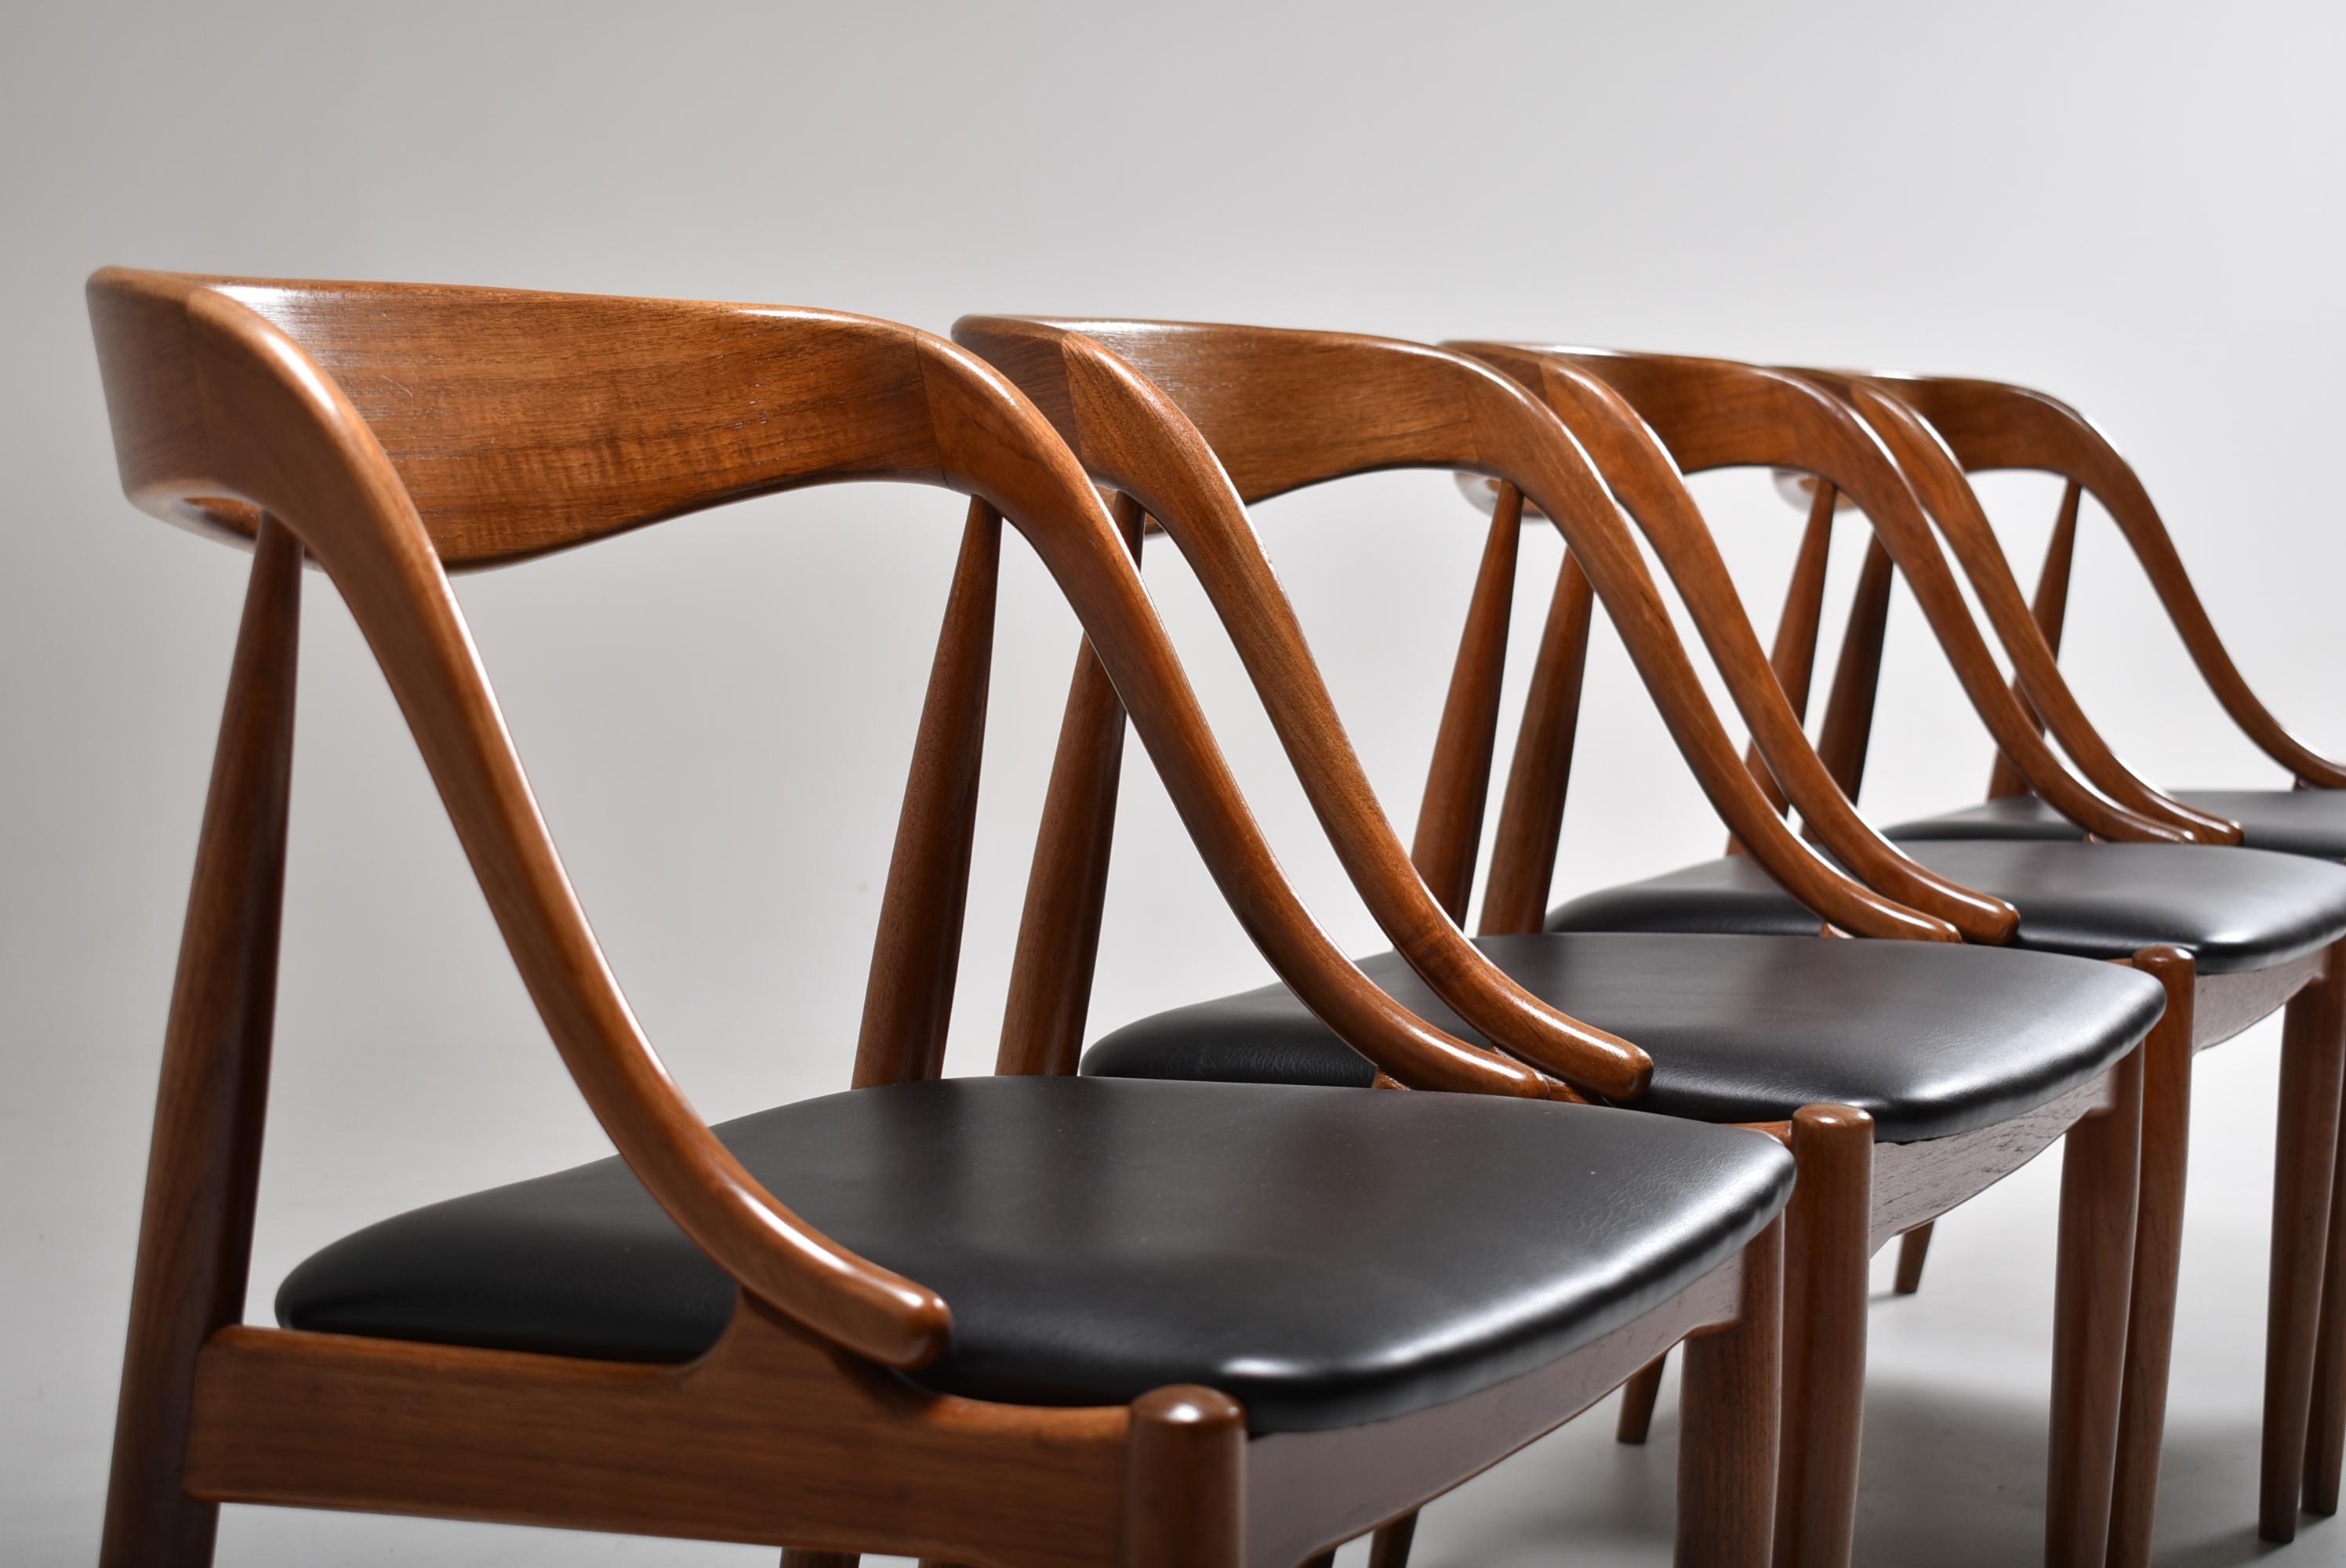 Faux Leather Set of Four Teak Dining Chairs by Johannes Andersen for Uldum, Denmark, 1960